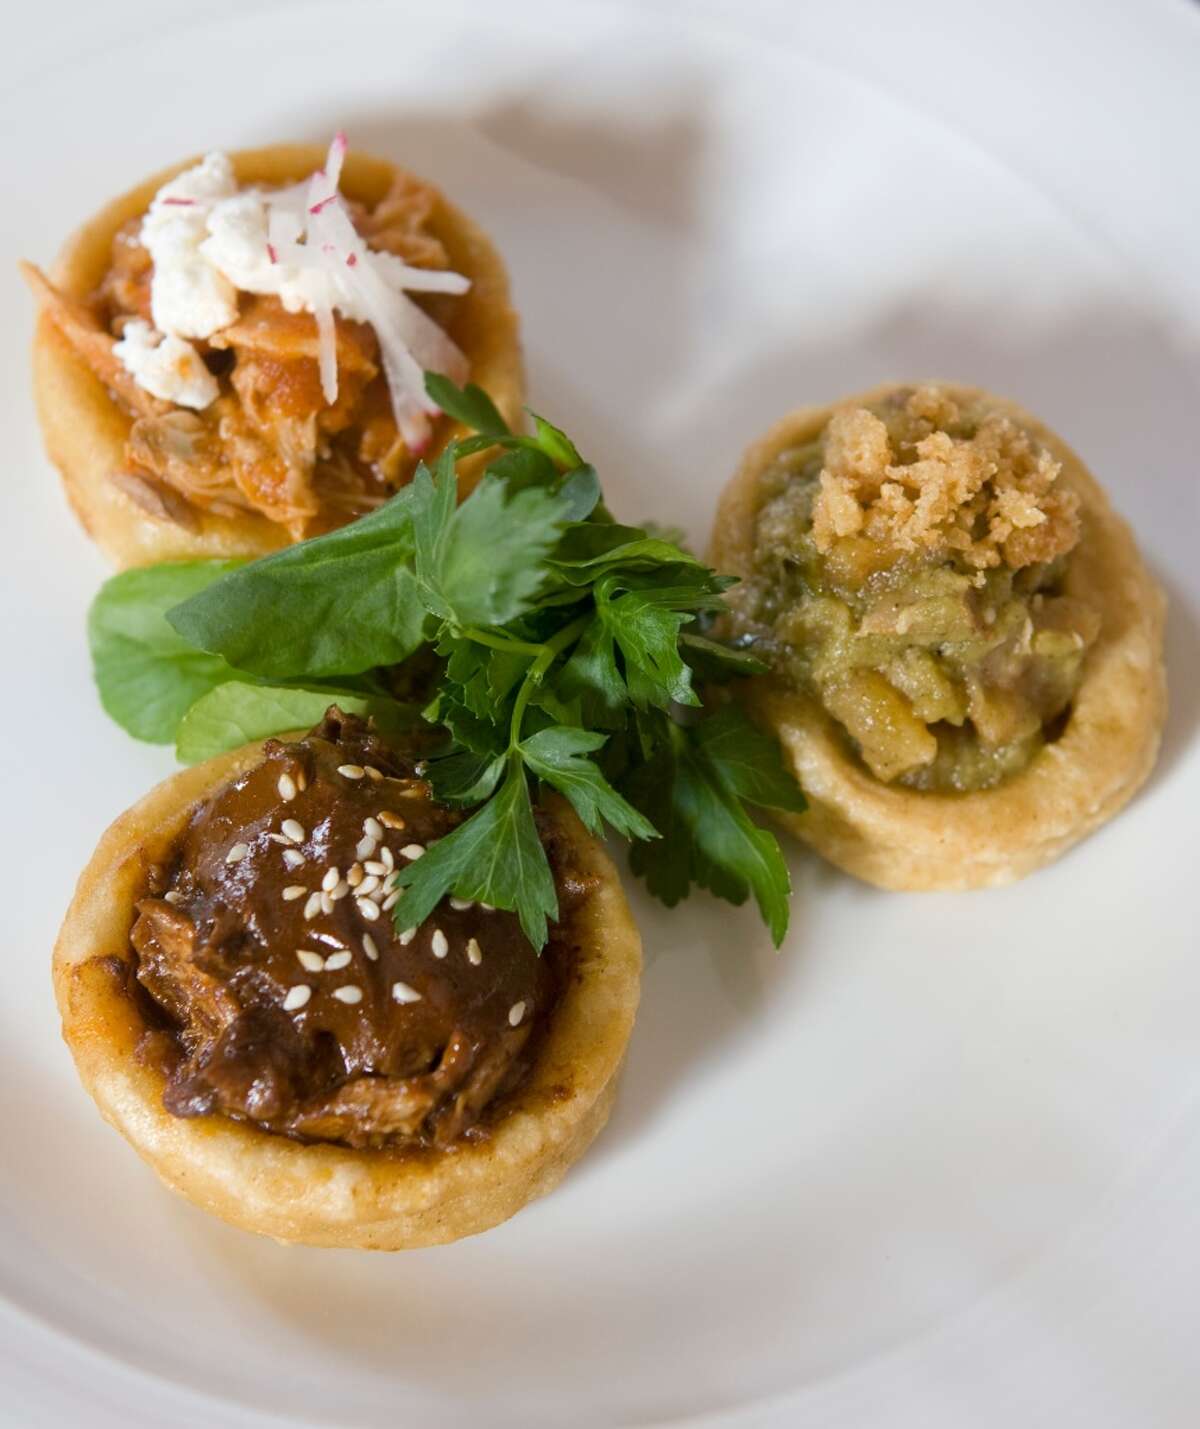 Duck mole sopesito, rabbit tinga and pork cracklings in salsa verde are a featured dish at Hugo's.